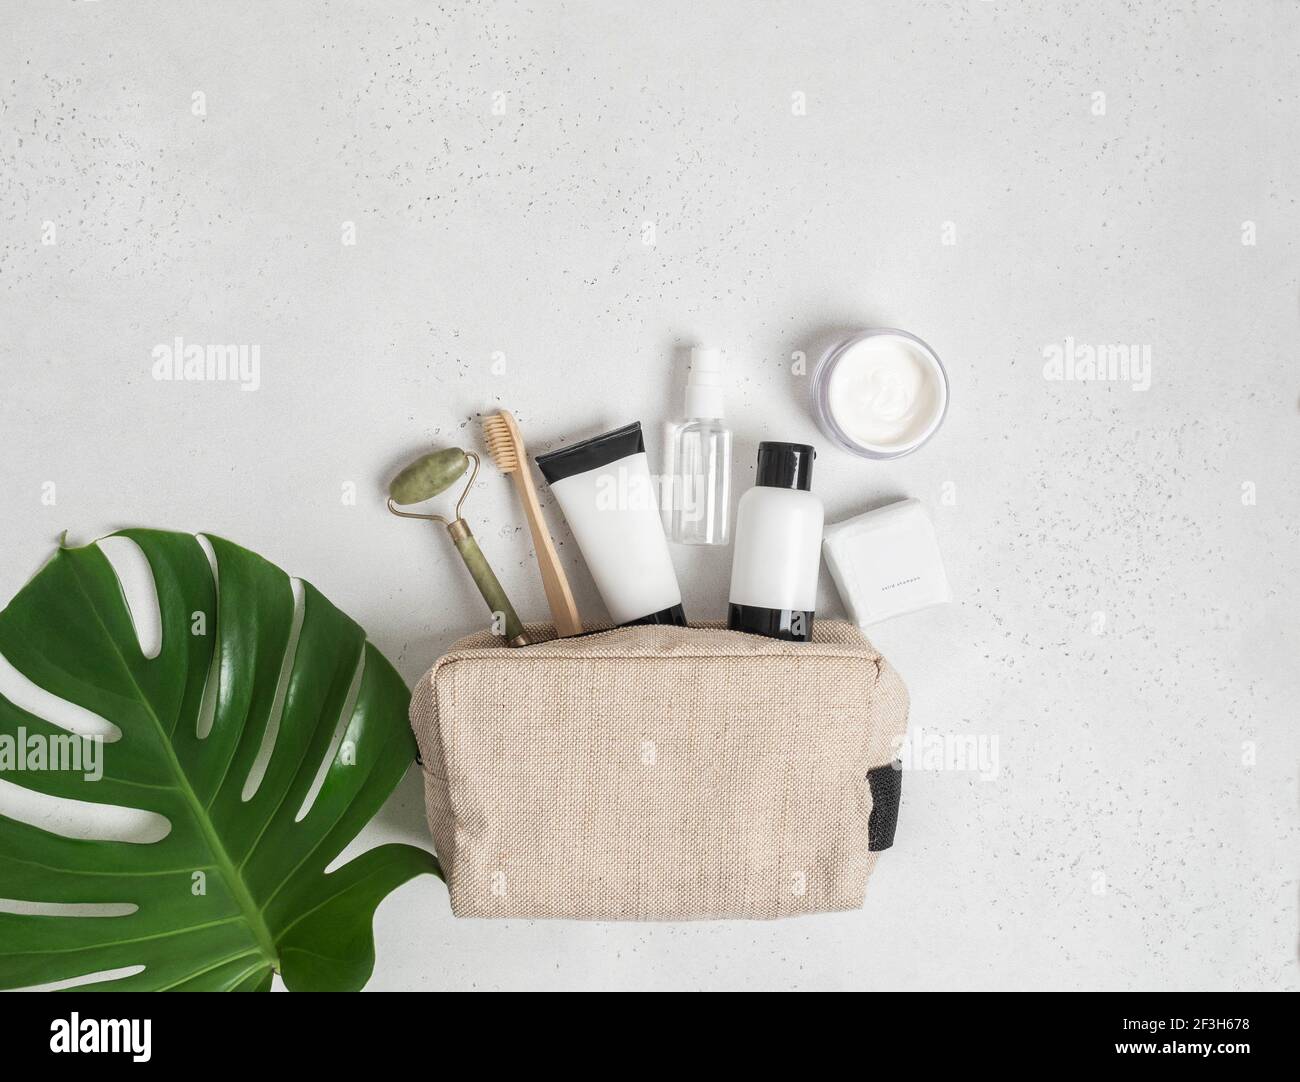 Travel cosmetic bag with the necessary means to care for women's skin. Cosmetics, massager with crystals, dry shampoo, cotton buds, toothbrushes in a Stock Photo